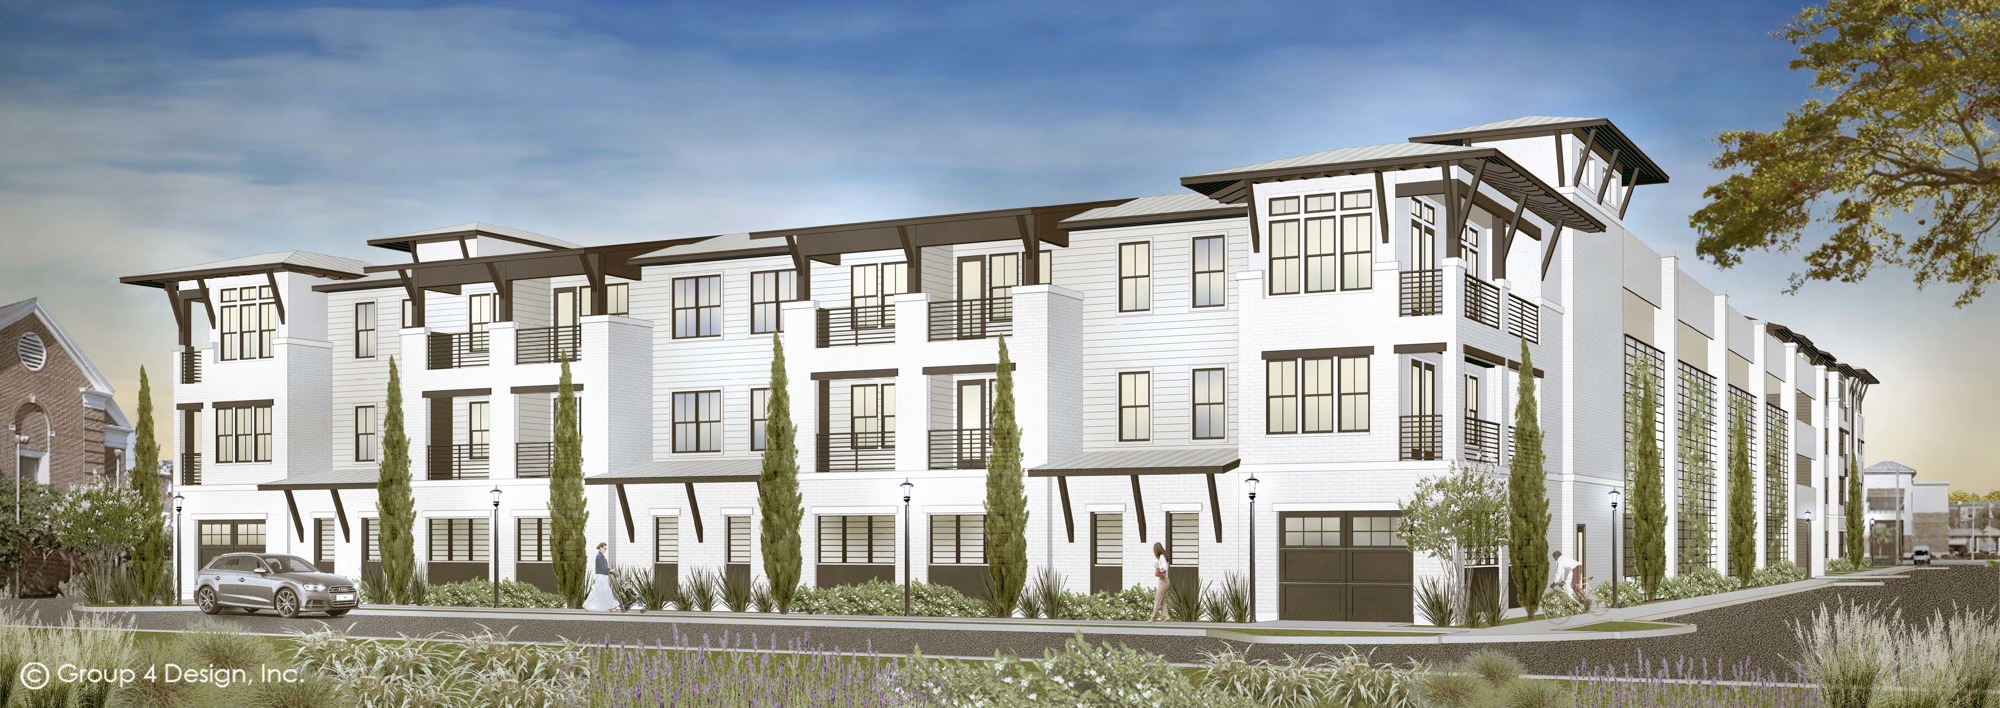 Park Place at San Marco  will have 141 units.